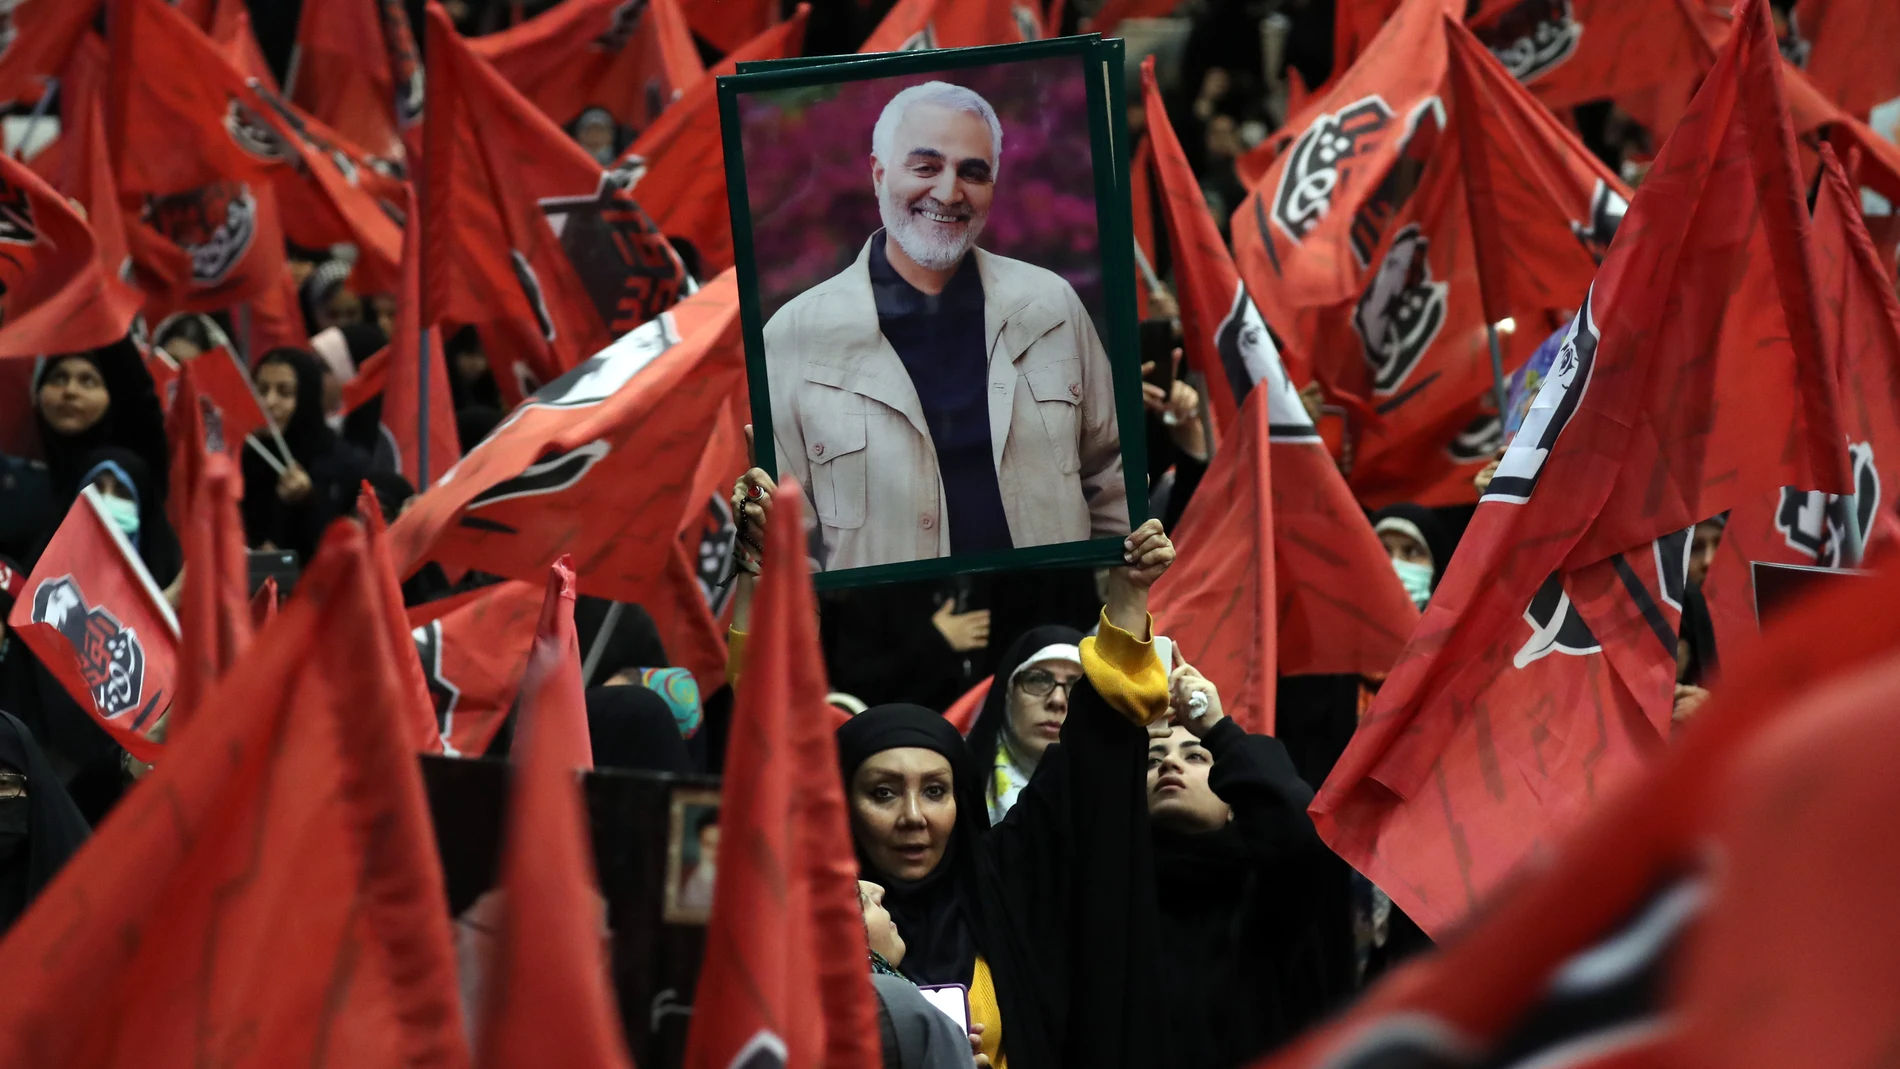 Tehran (Iran(islamic Republic Of)), 03/01/2024.- Iranian's wave images of the late Iran's Islamic Revolutionary Guard Corps (IRGC) Quds Force commander Qasem Soleimani during the fourth anniversary of his death, in Tehran, Iran, 03 January 2024. On the fourth anniversary of the assassination of Iranian General Qasem Soleimani, two explosions have killed at least 103 people and another 171 people were wounded near the mausoleum dedicated to him, according to Iranian state television. As part o...